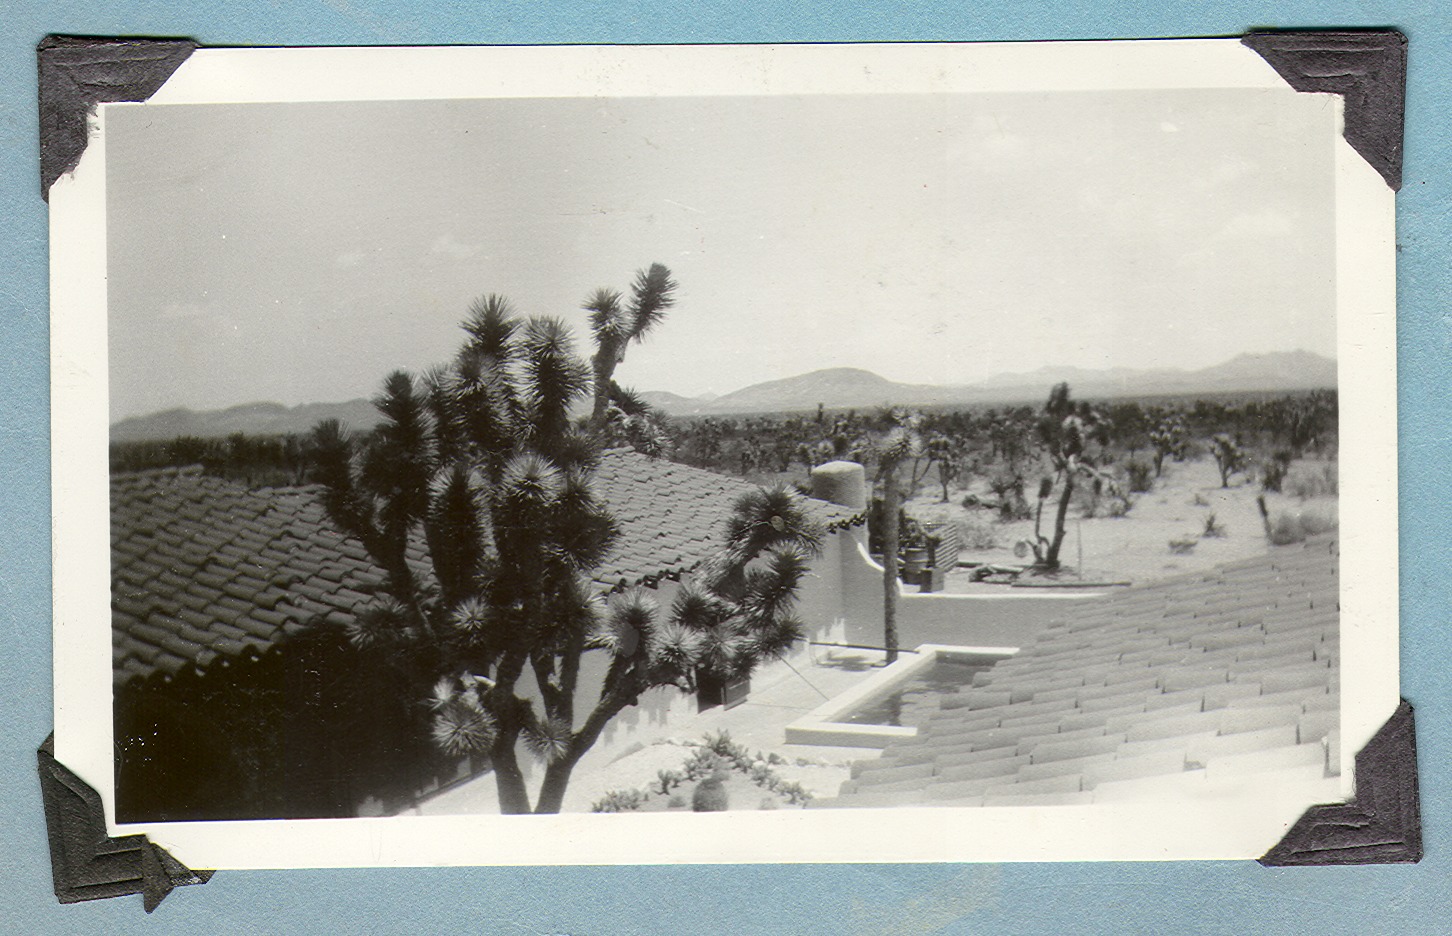 View of rooftops, desert and mountains in distance: photographic print